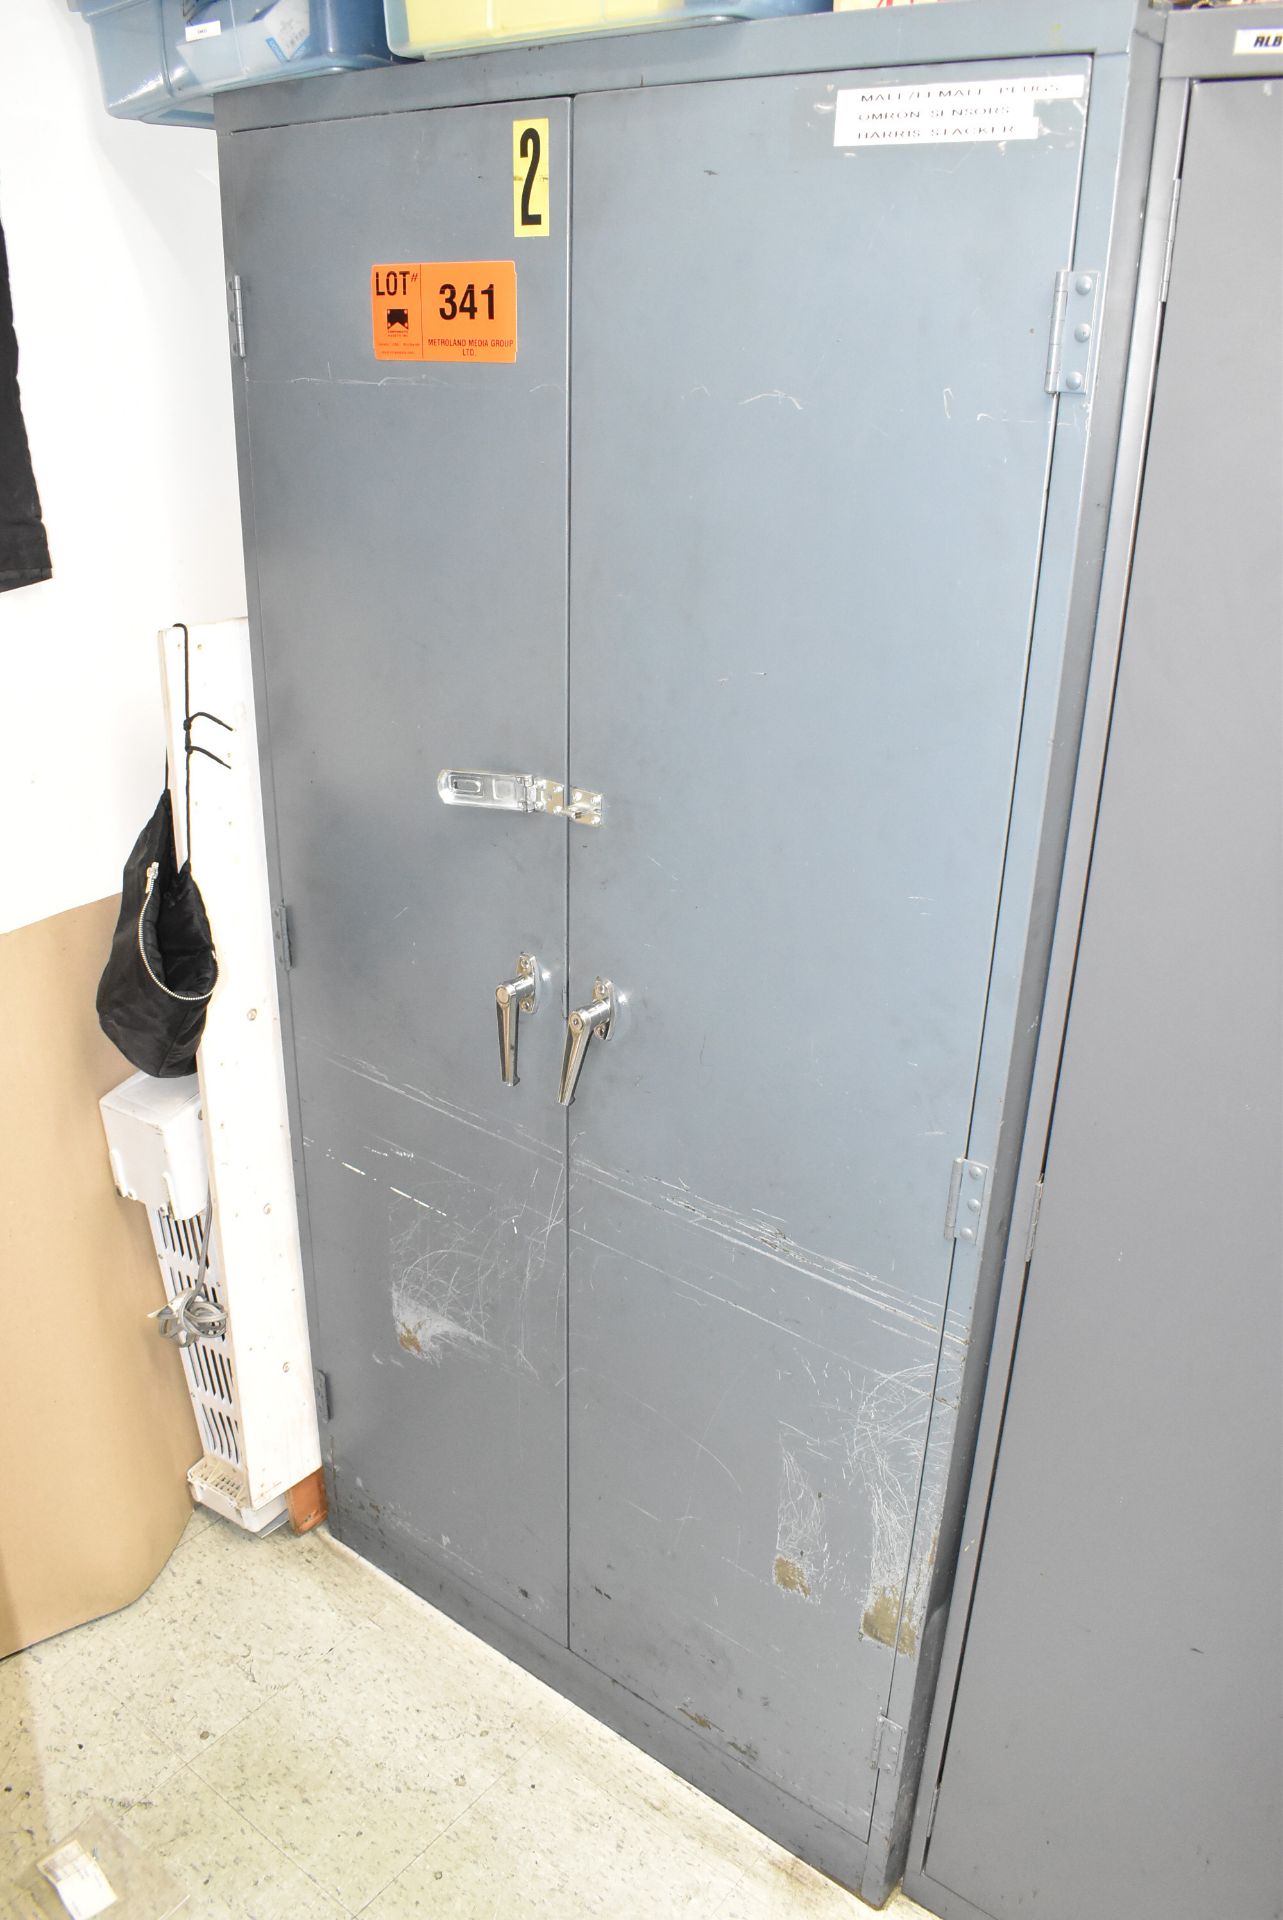 LOT/ HIGHBOY CABINET WITH CONTENTS - INCLUDING PLUGS, PROXIMITY SENSORS, ELECTRICAL CONDUIT